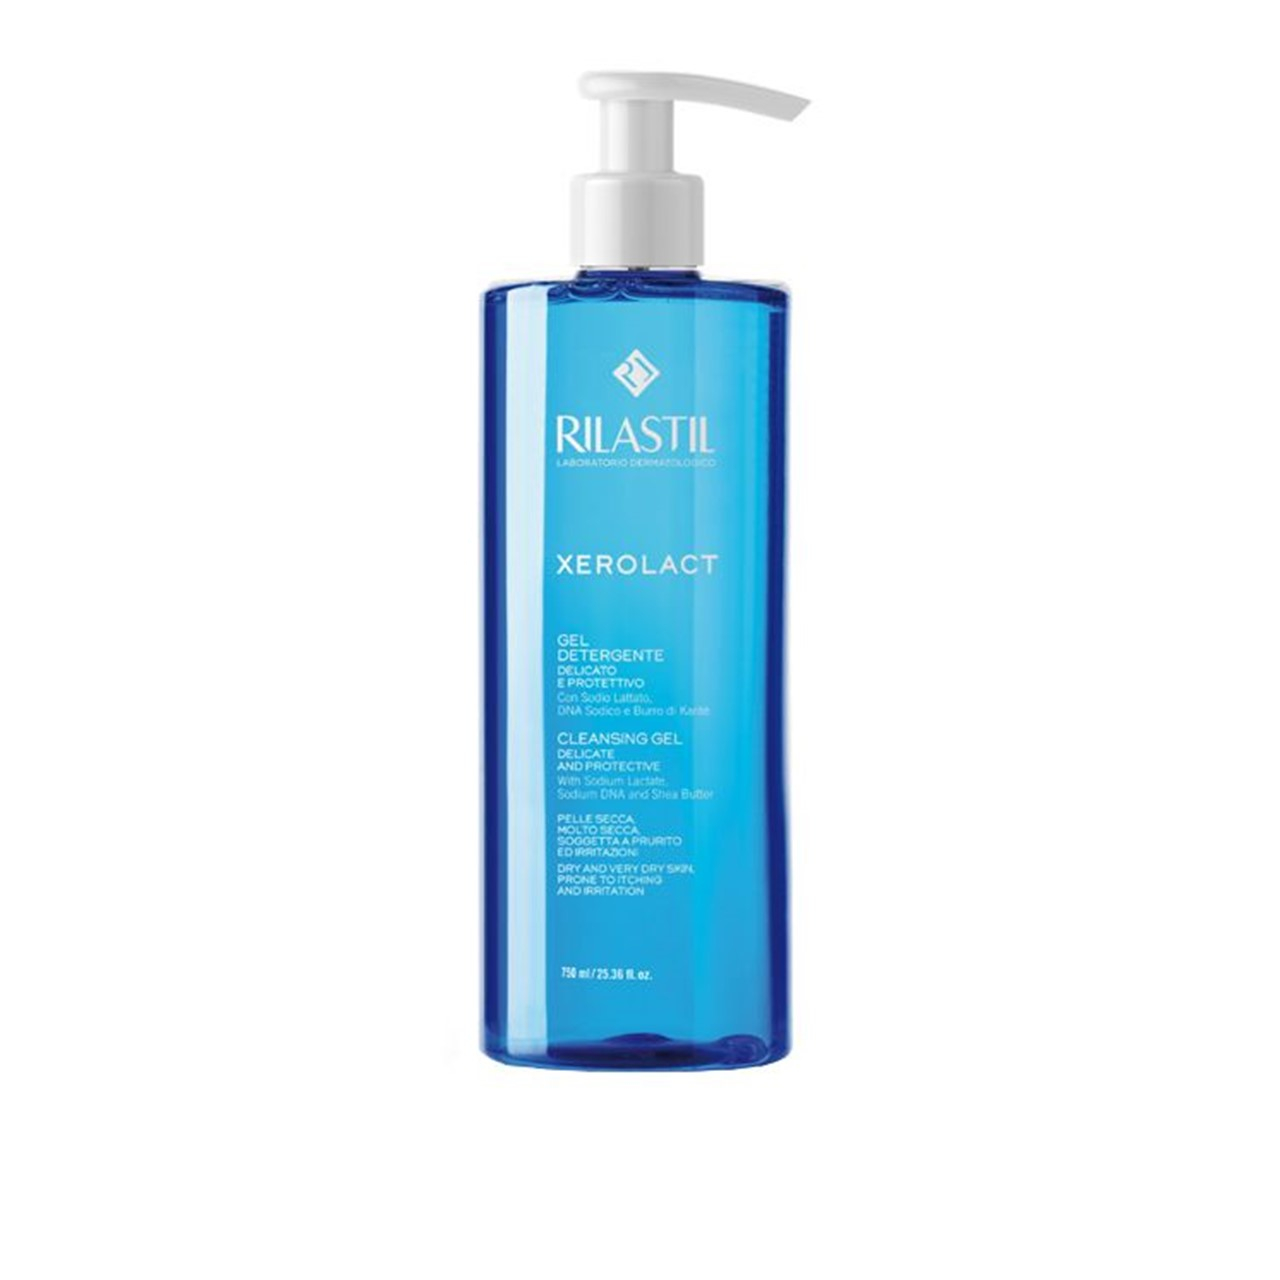 Rilastil Xerolact Cleansing Gel Delicate and Protective 750ml (25.36fl oz)